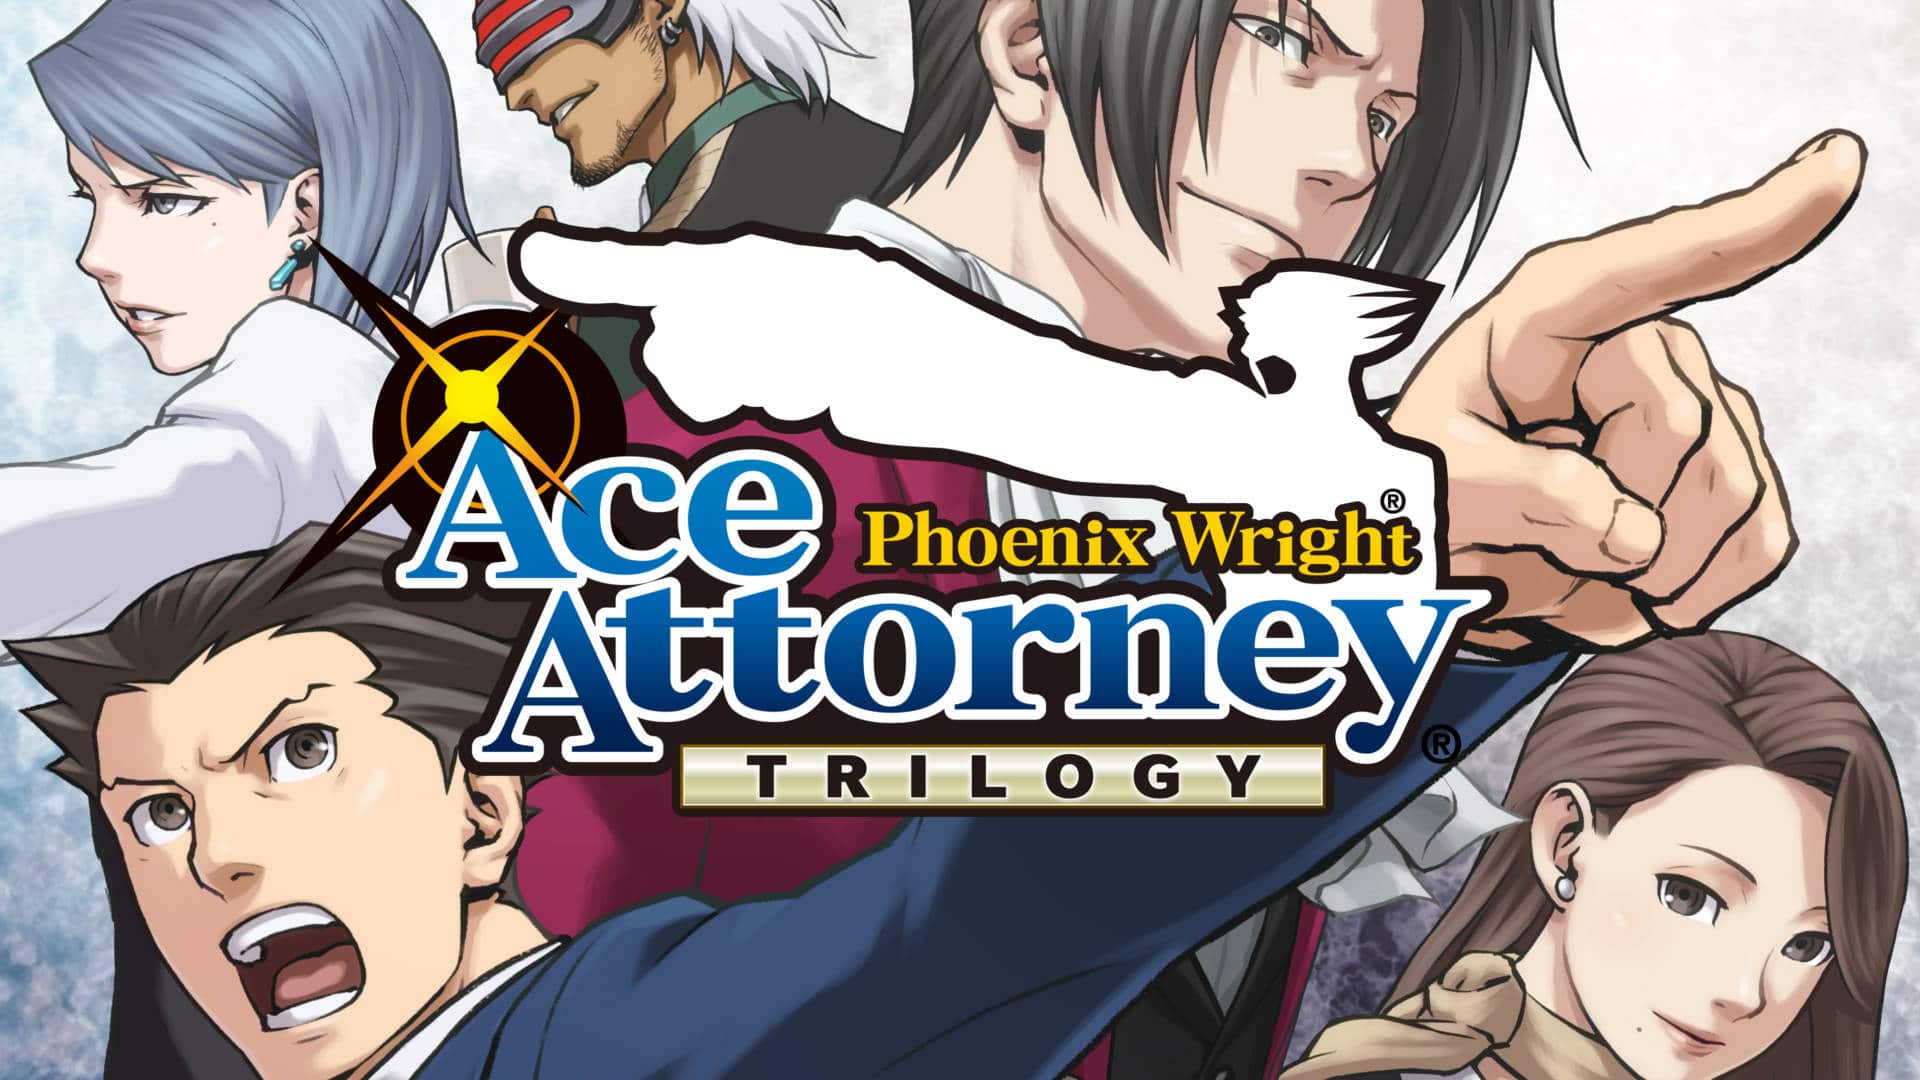 36 Phoenix Wright Ace Attorney Trilogy Wallpapers On Wallpapersafari